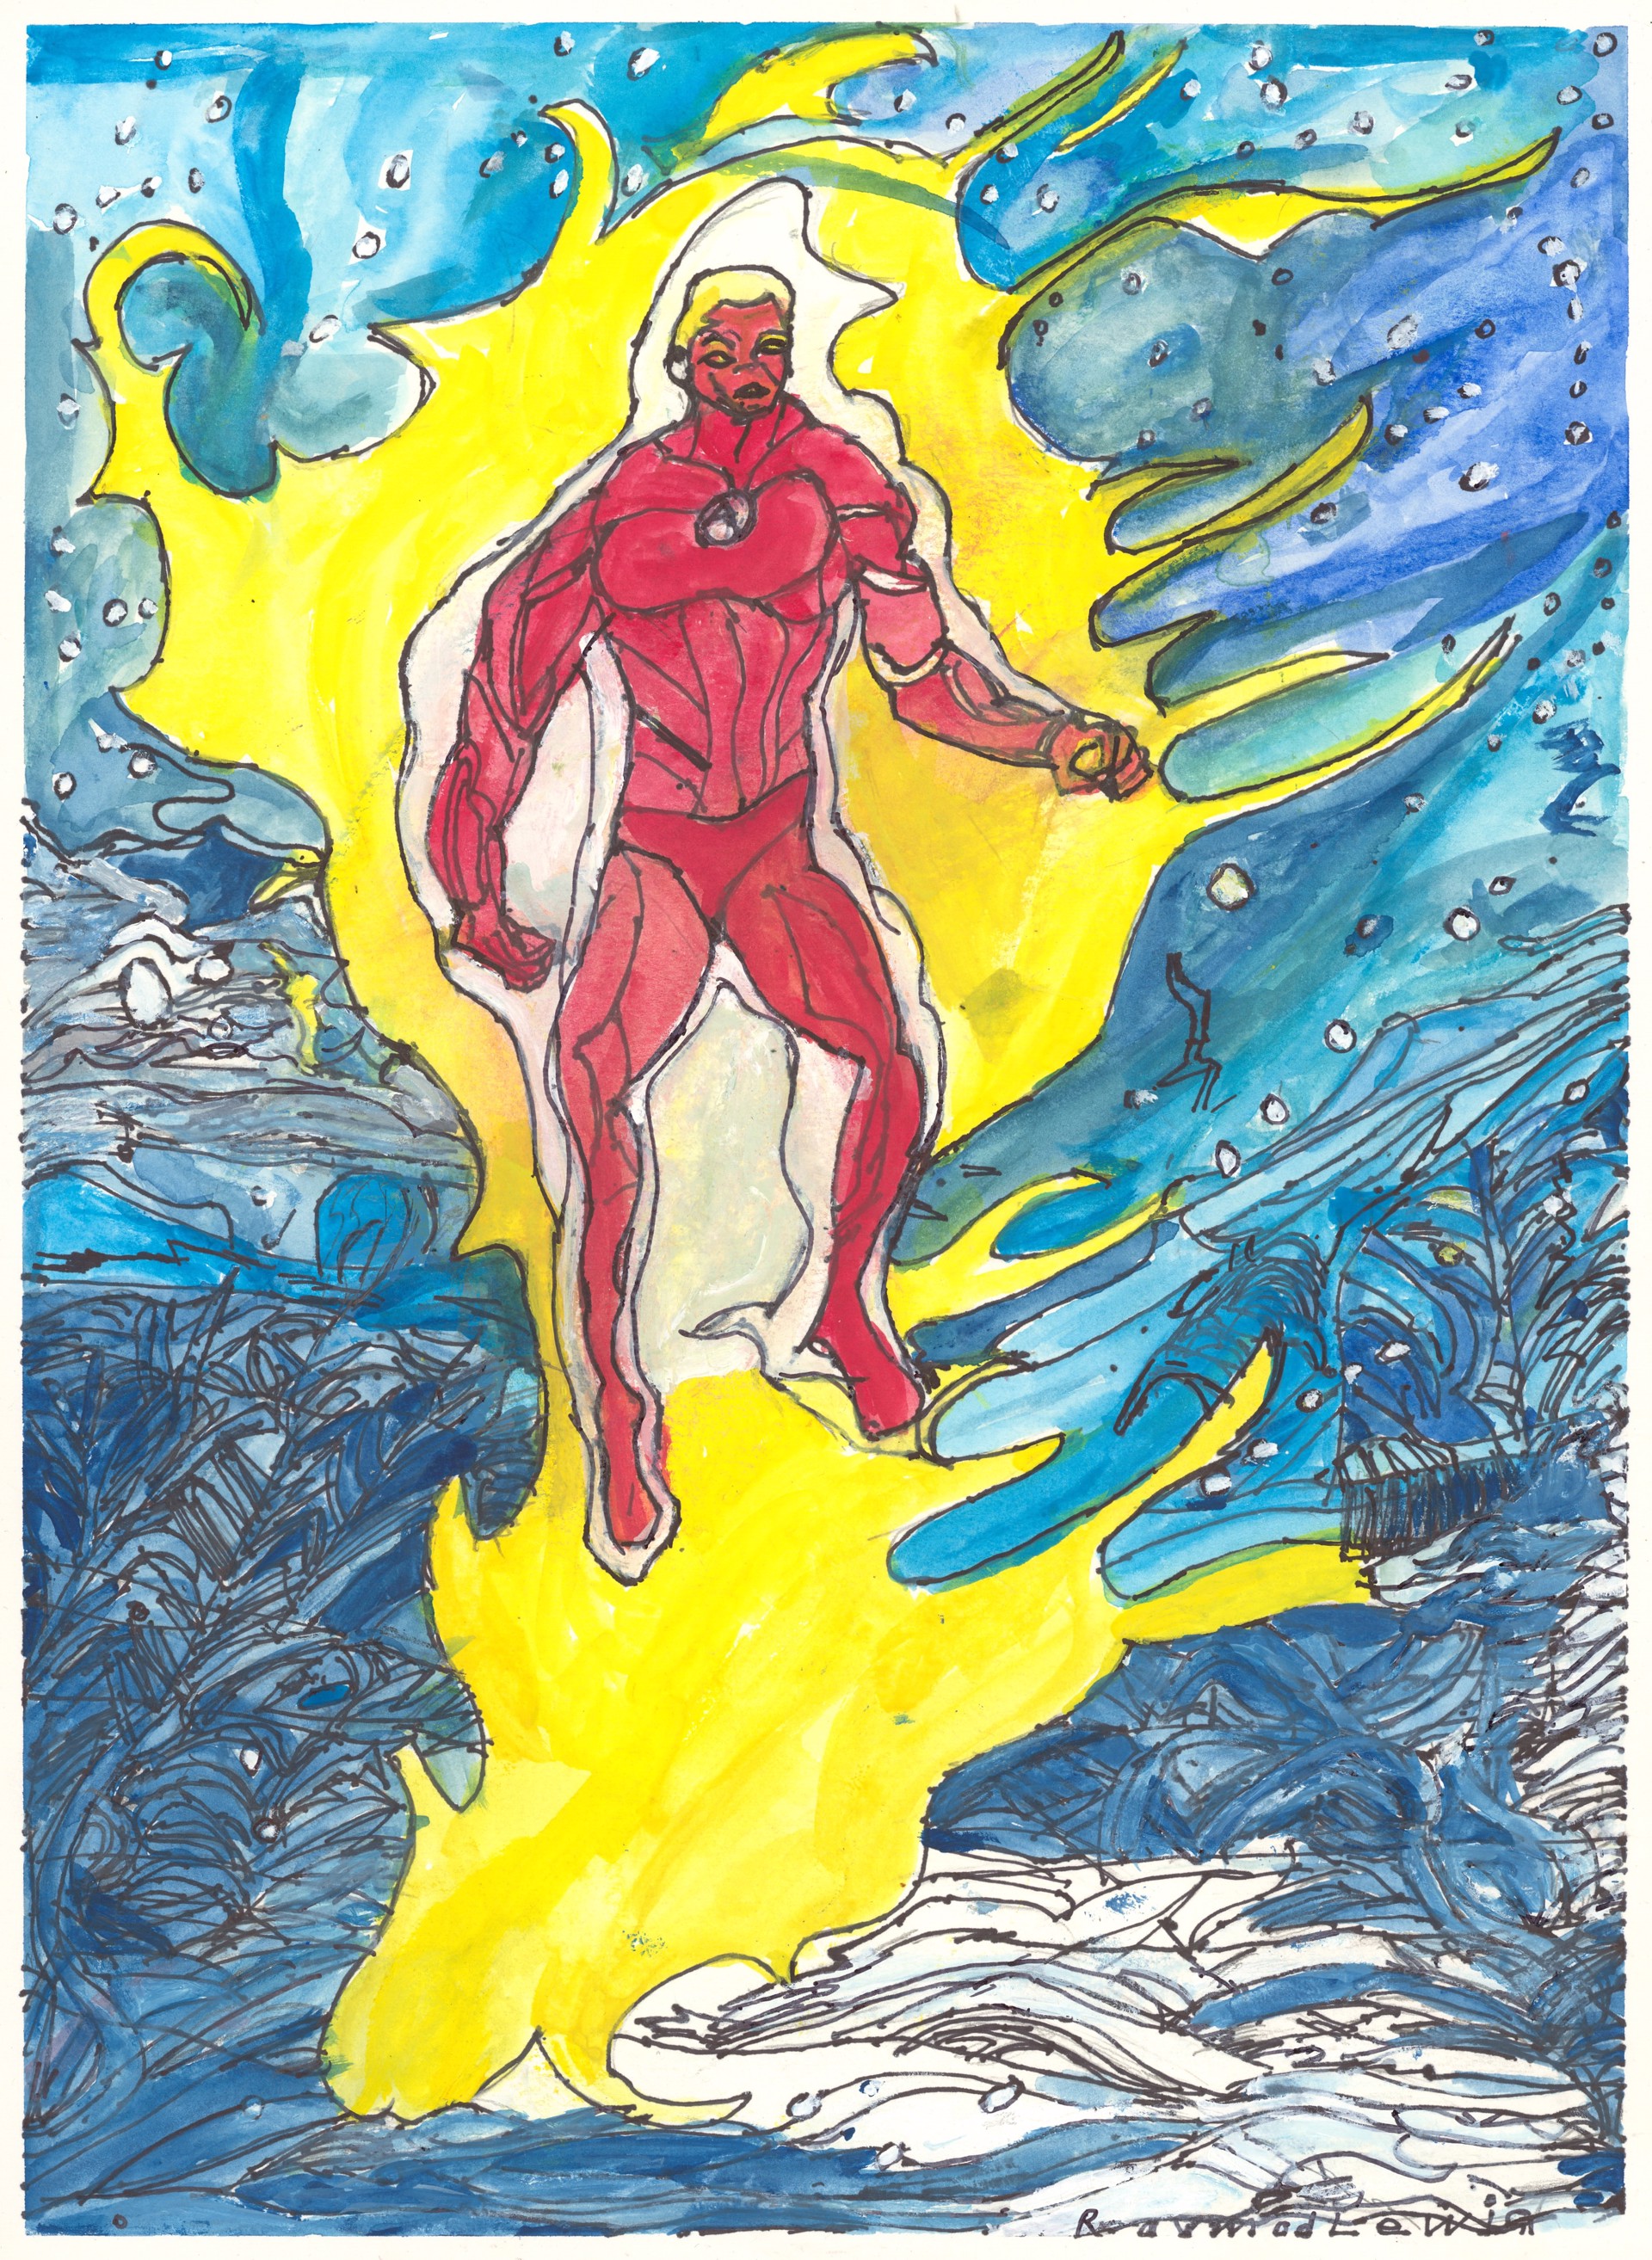 The Human Torch by Raymond Lewis